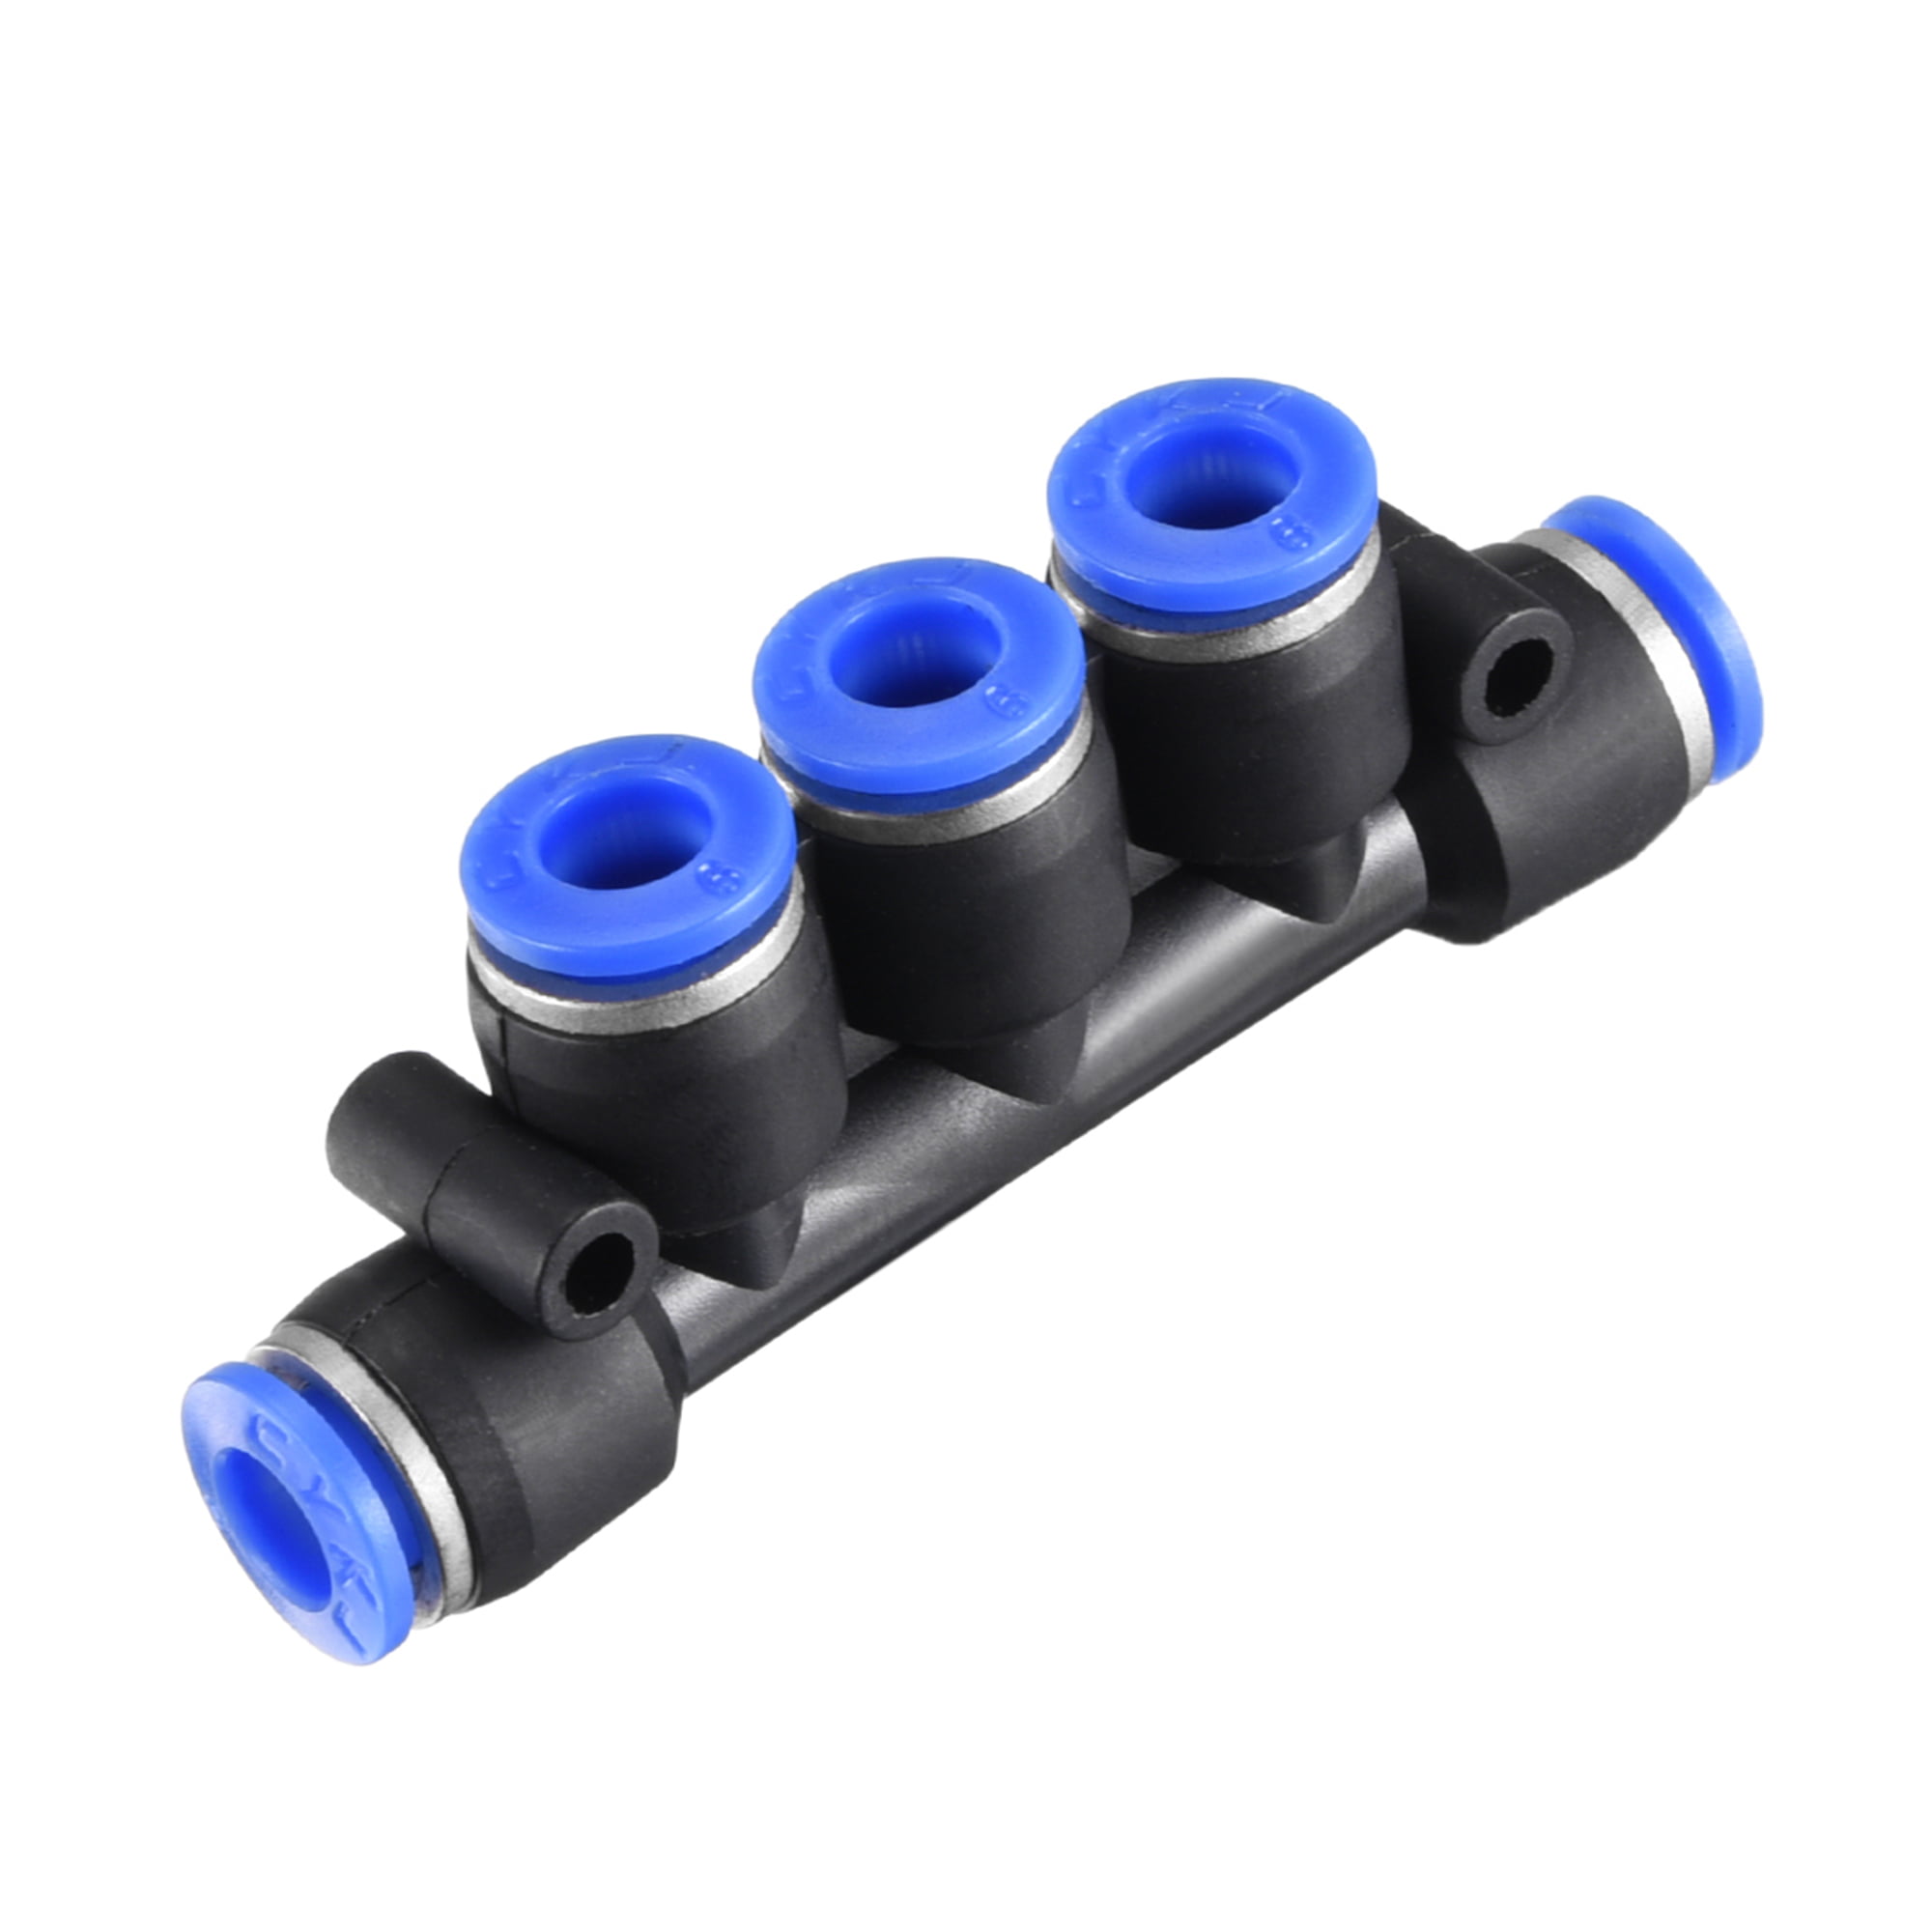 Push to Connect Fittings 6mm or15/64” OD Manifold Union Tube Fittings 